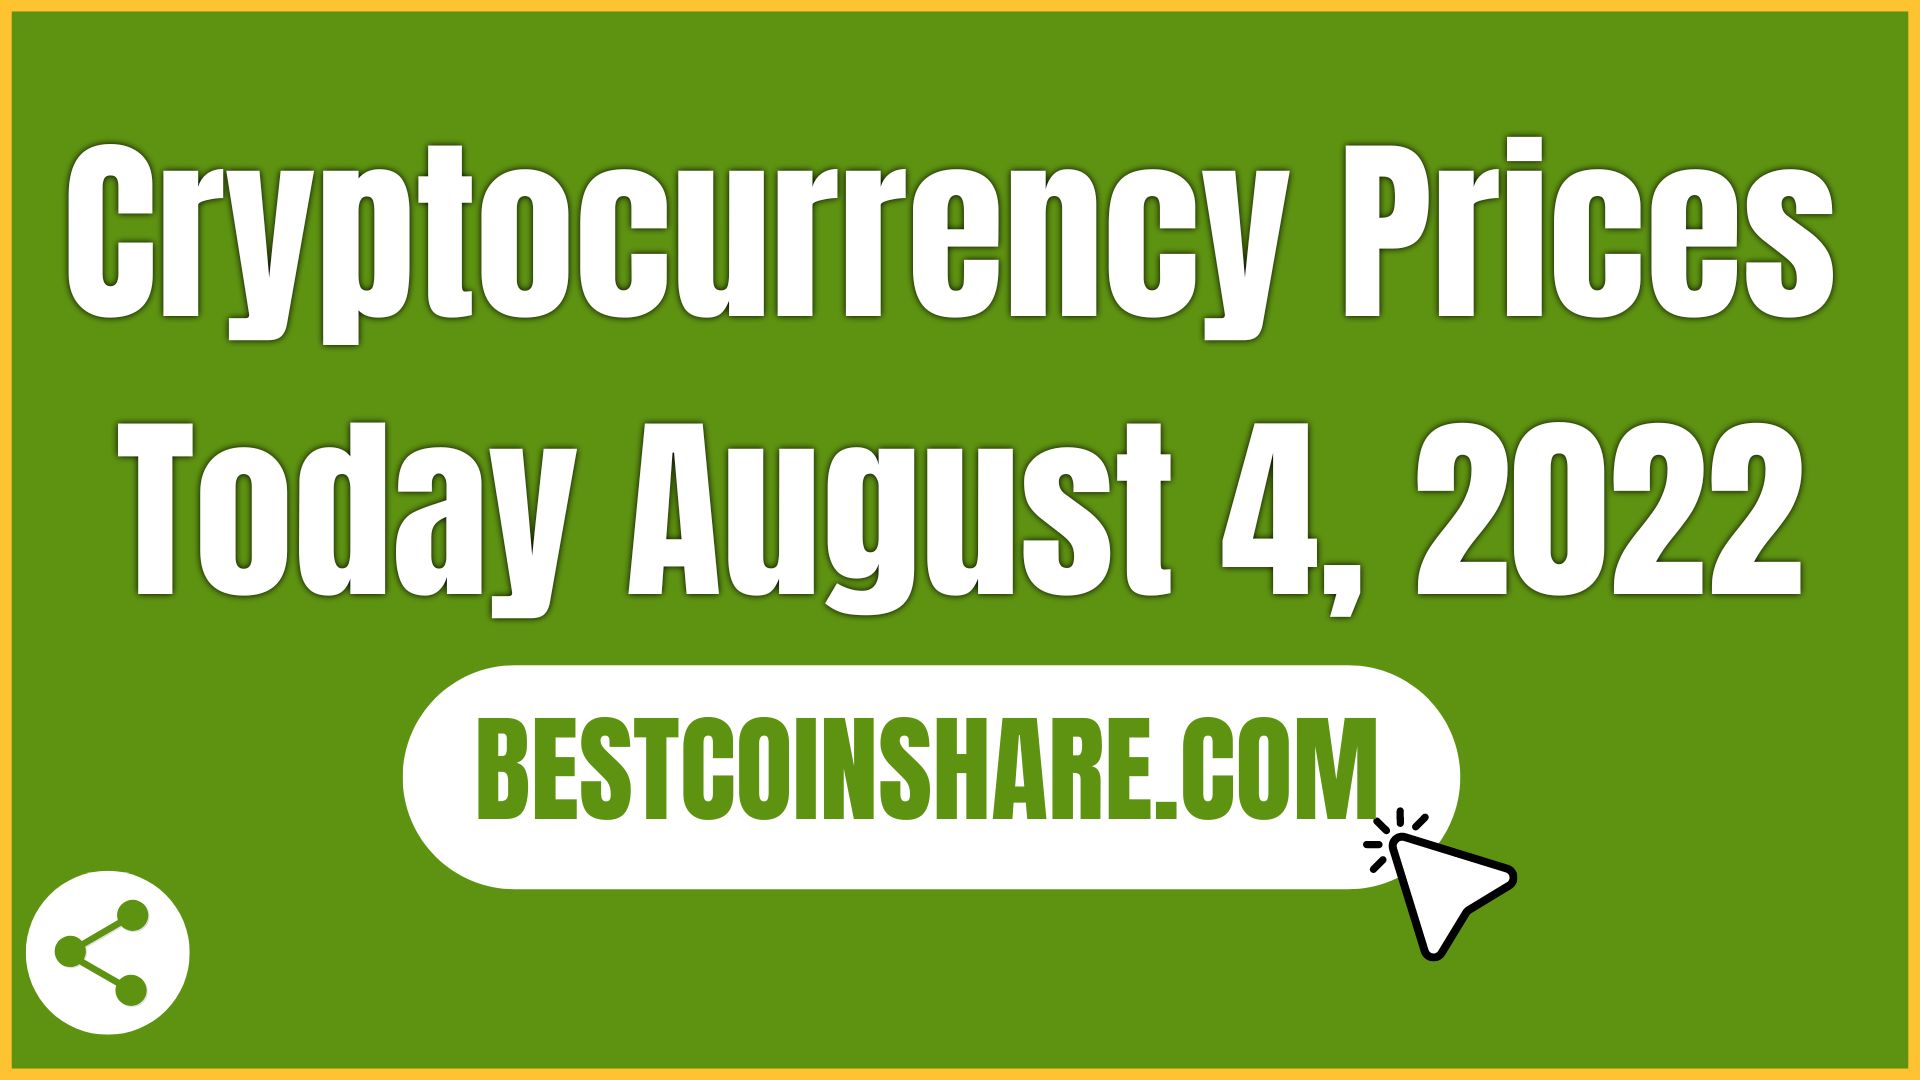 live-cryptocurrency-prices-today-august-4-2022.jpg